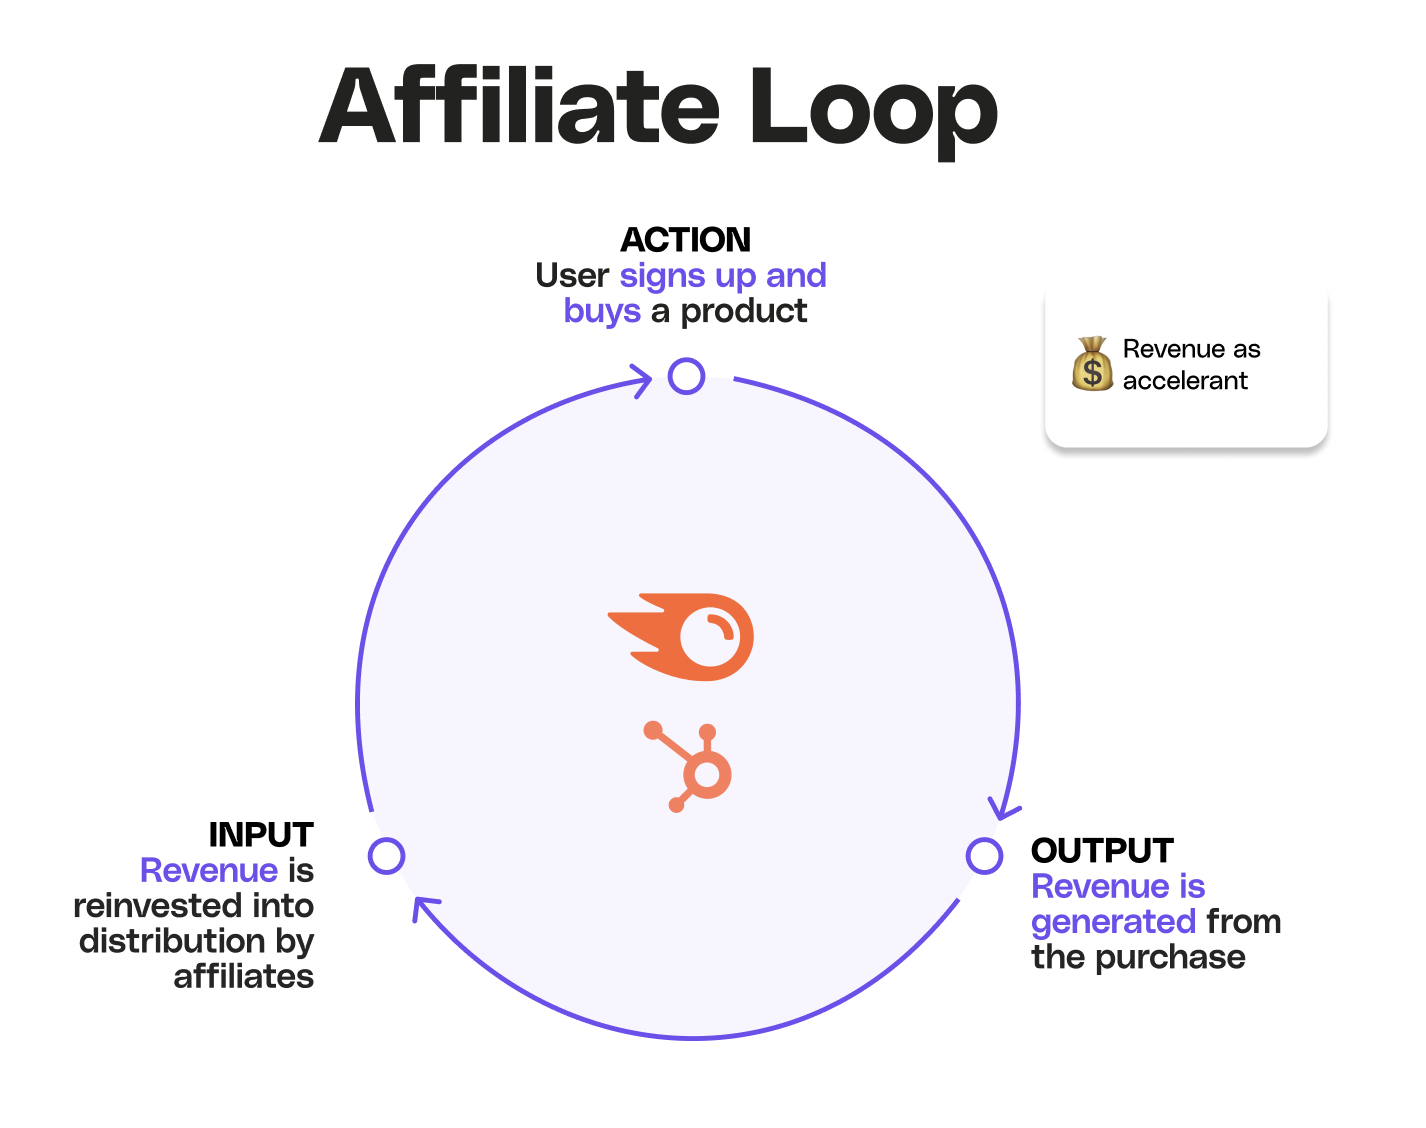 Image showing an affiliate loop